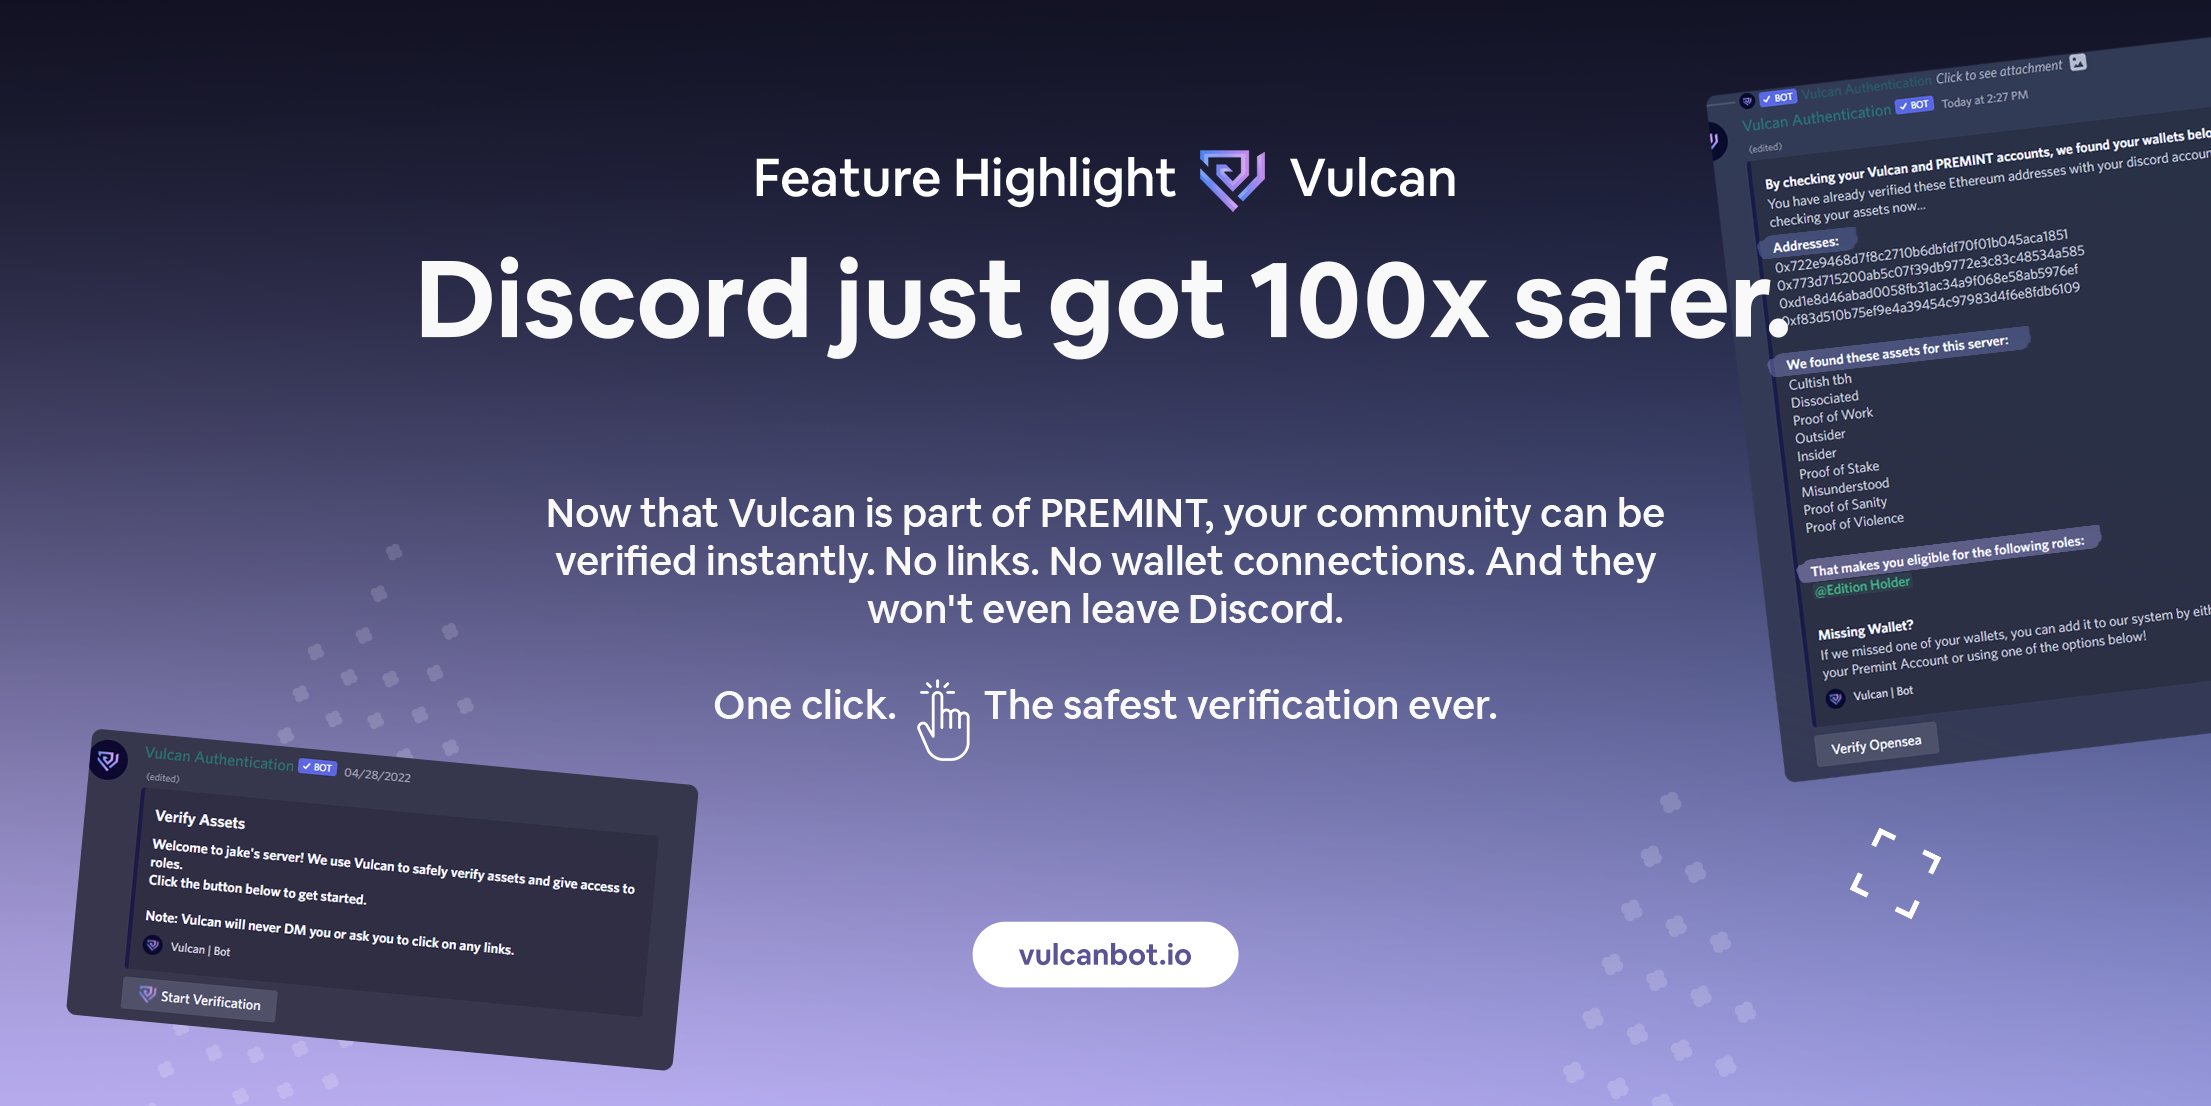 Vulcan on X: Today we release the beta for the Vulcan Giveaway Bot! It has  a major improvement over traditional, non-web3 bots: 🤯 With Vulcan, a user  submits their verified wallet when